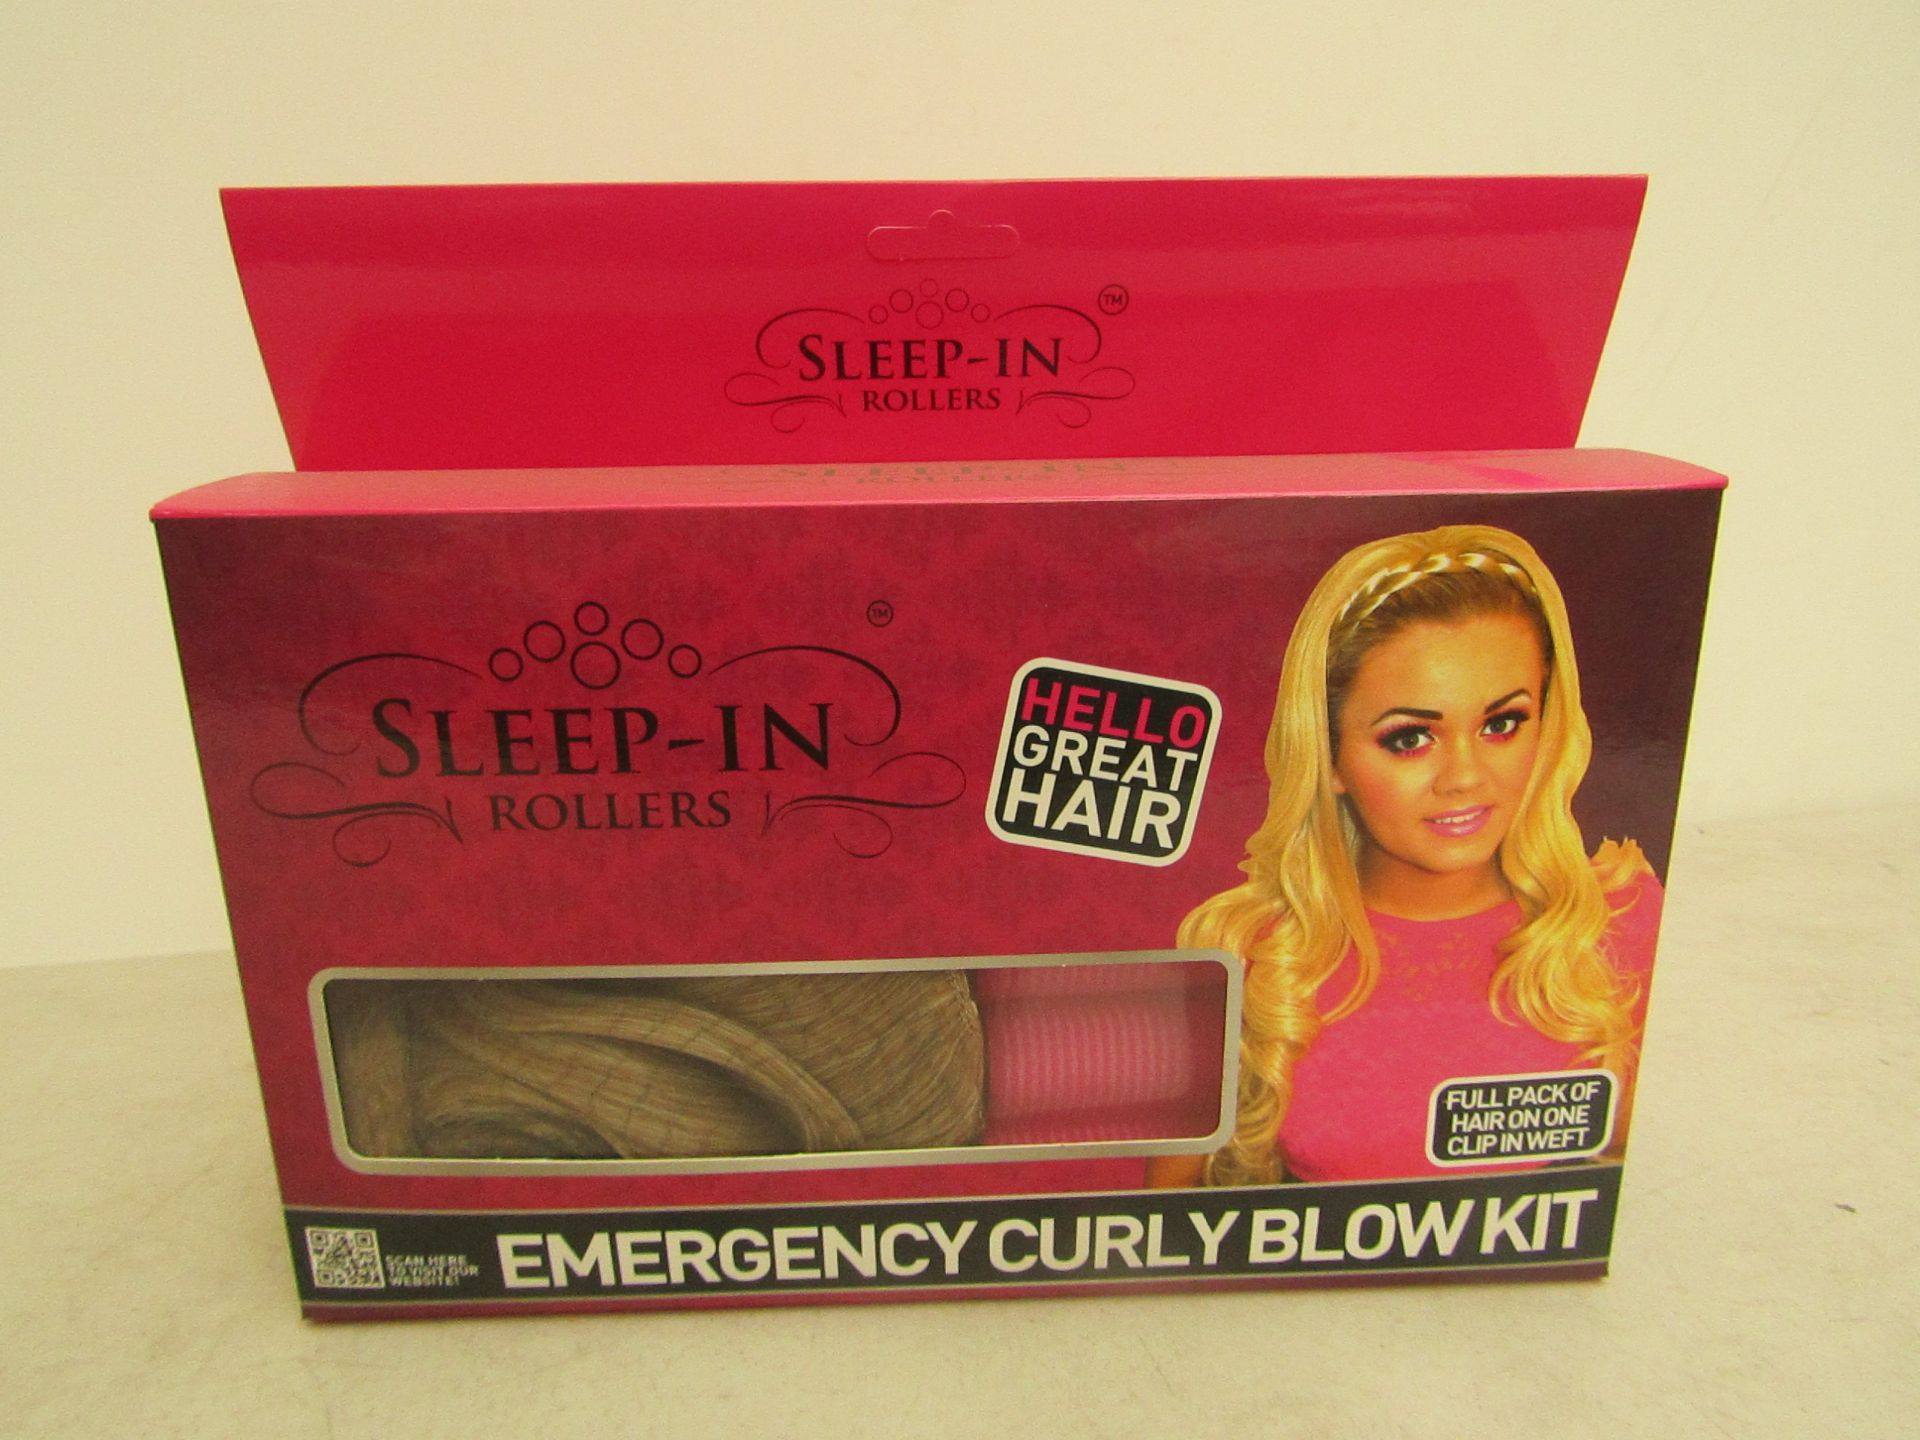 Emergency curly blow kit by 'Sleep-in rollers'. Pack contains full pack of Blonde hair on one clip